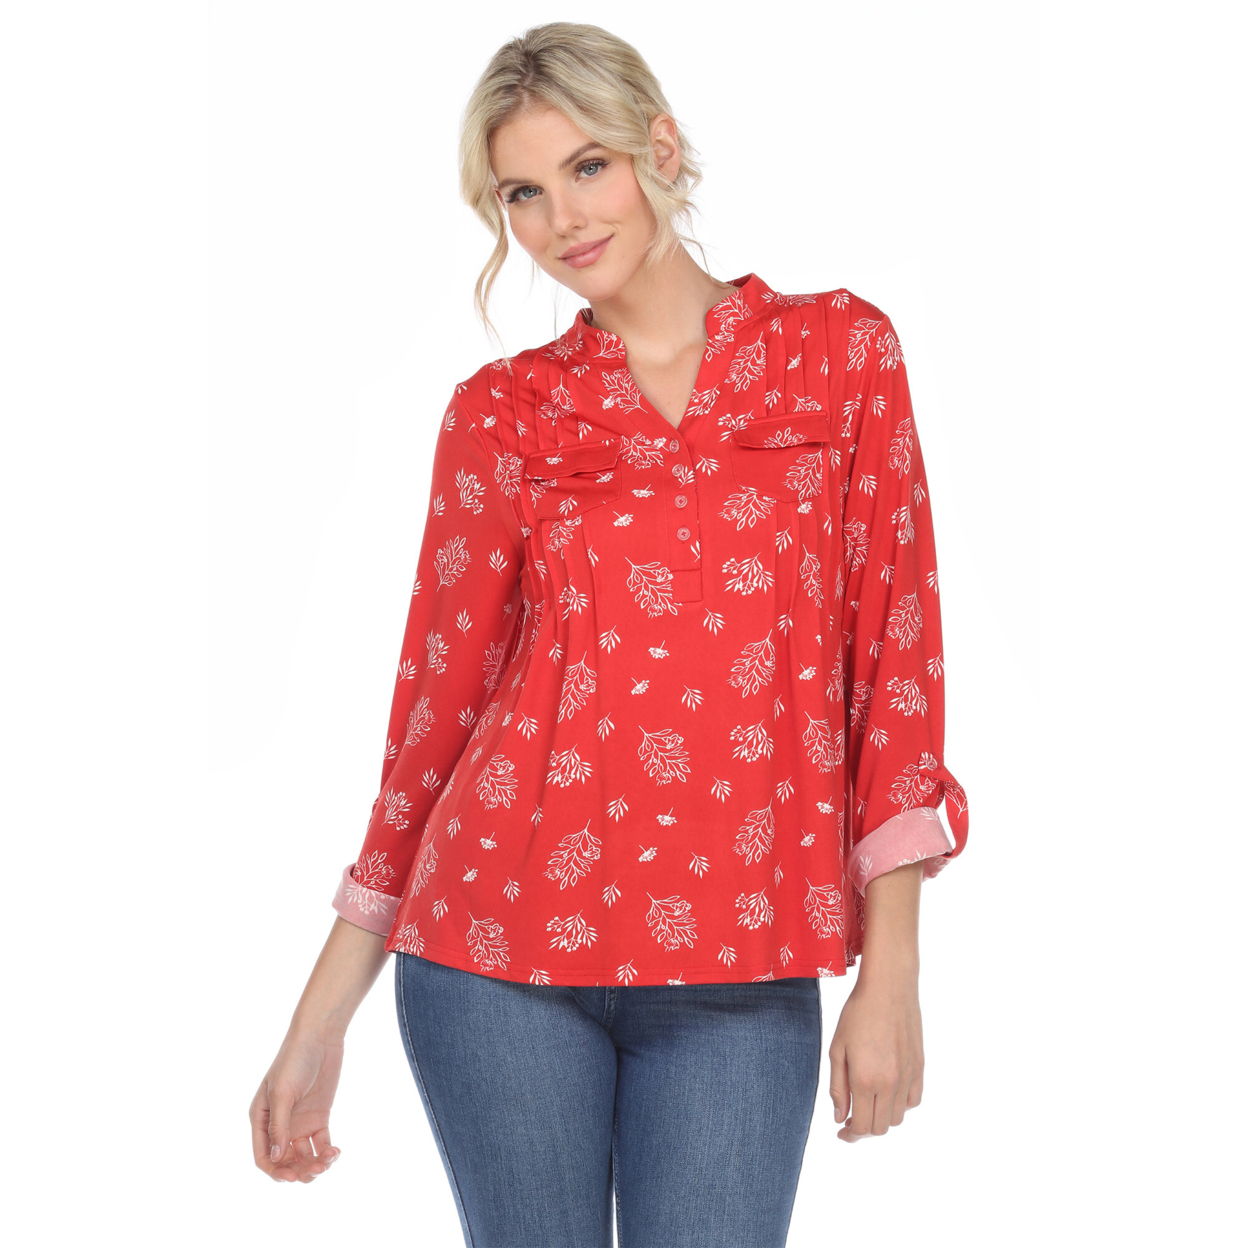 White Mark Women's Pleated Long Sleeve Leaf Print Blouse - Red, Large